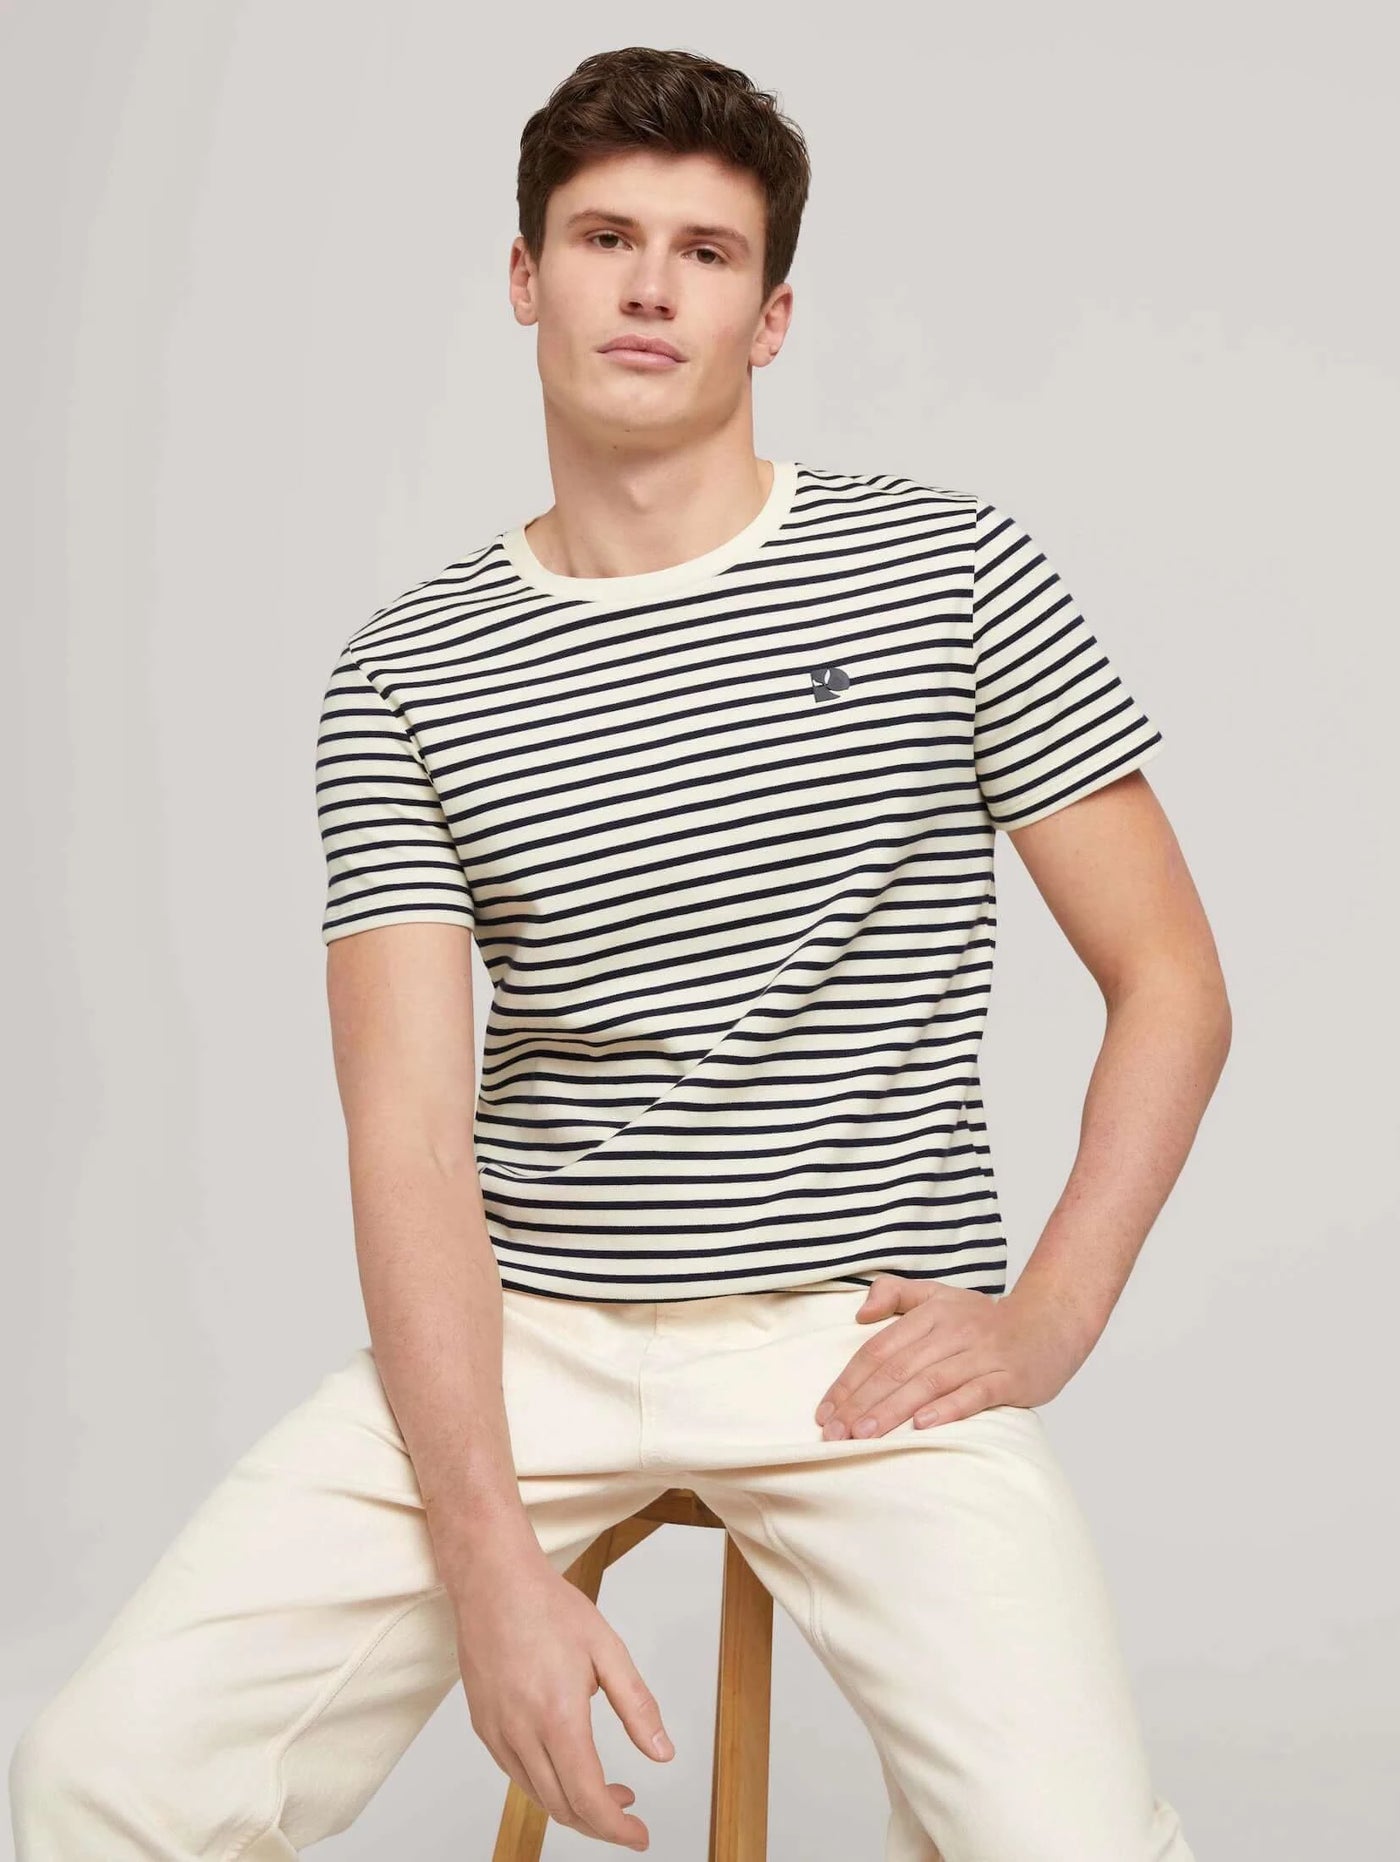 MBRC@TOMTAILOR - MEN STRIPED T-SHIRT - STYLE VIEW